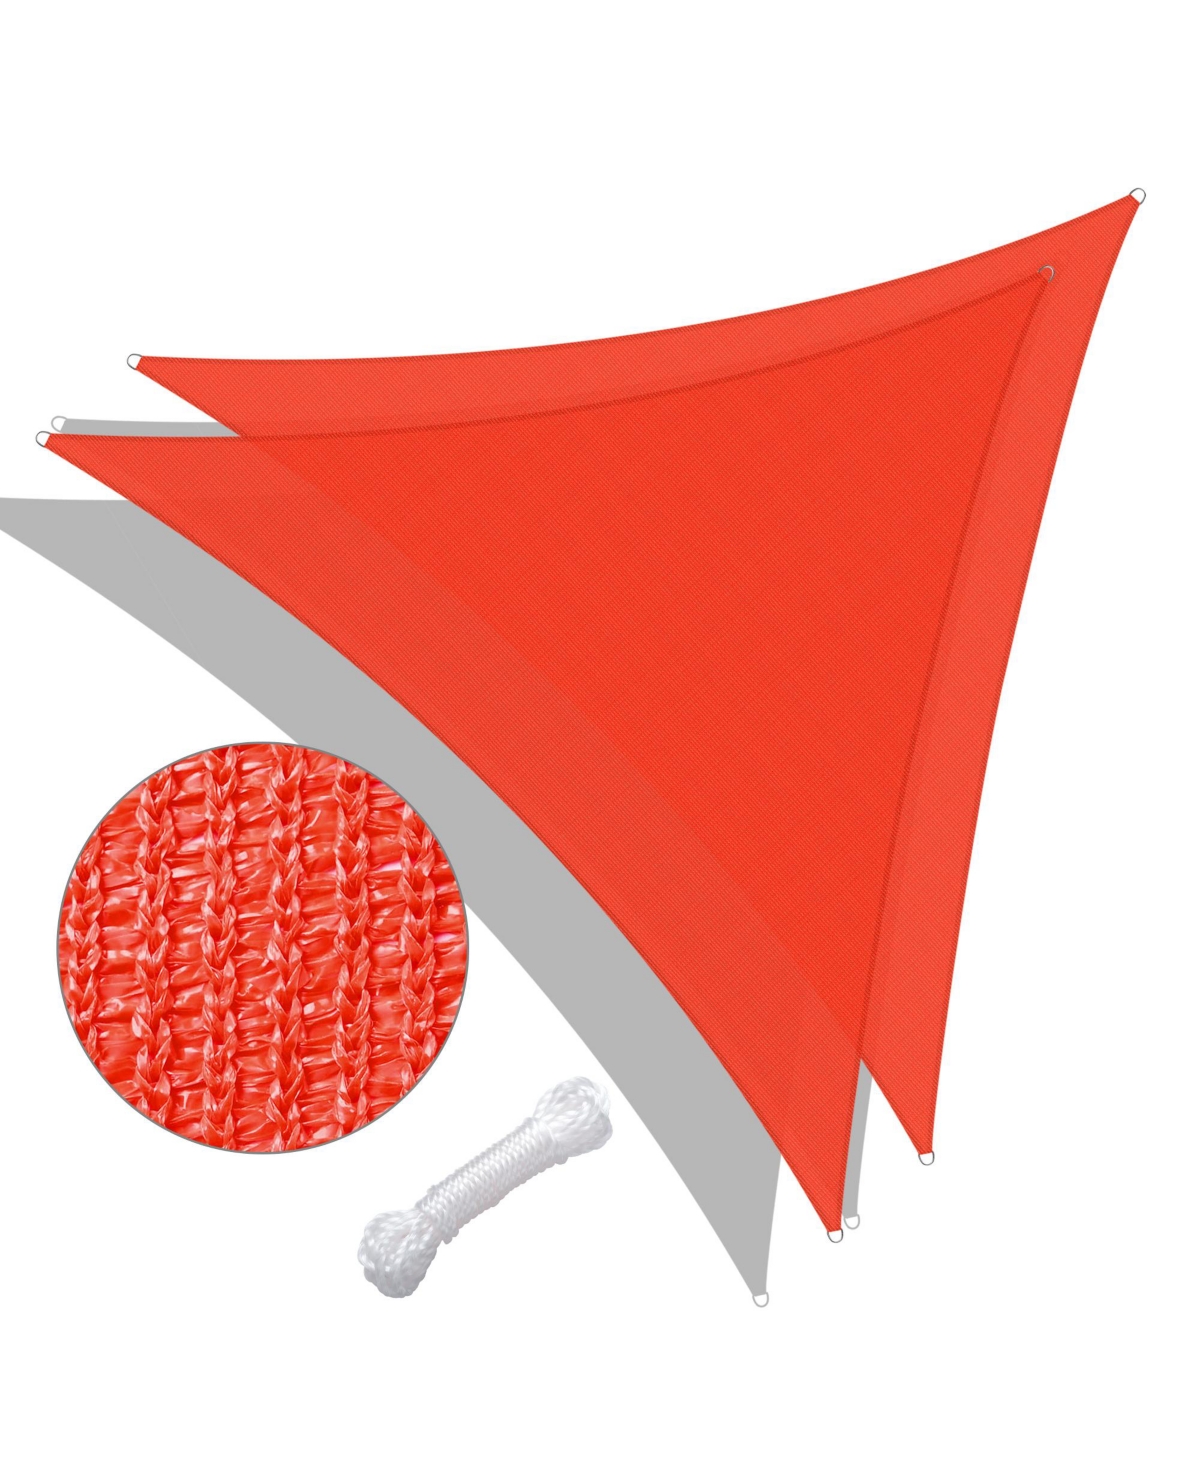 2 Pack 25 Ft 97% Uv Block Triangle Sun Shade Sail Canopy Outdoor Pool Cover Net - Watermelon red